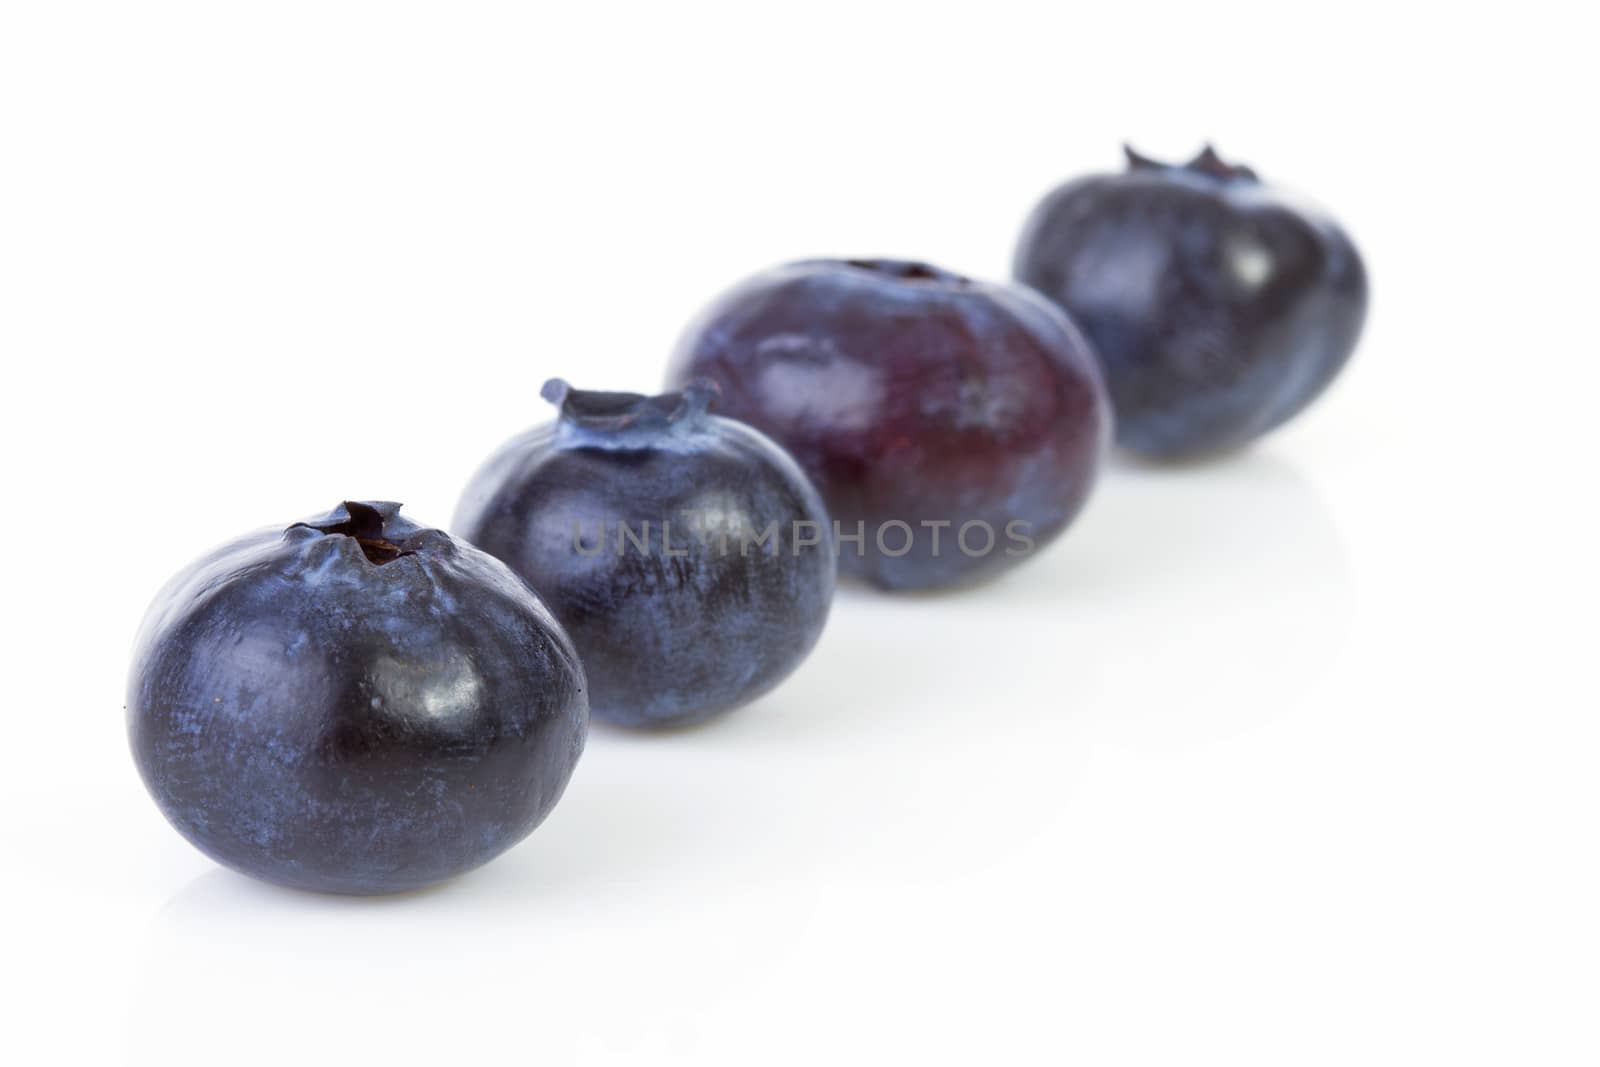 Four black currant berries in a row over white background